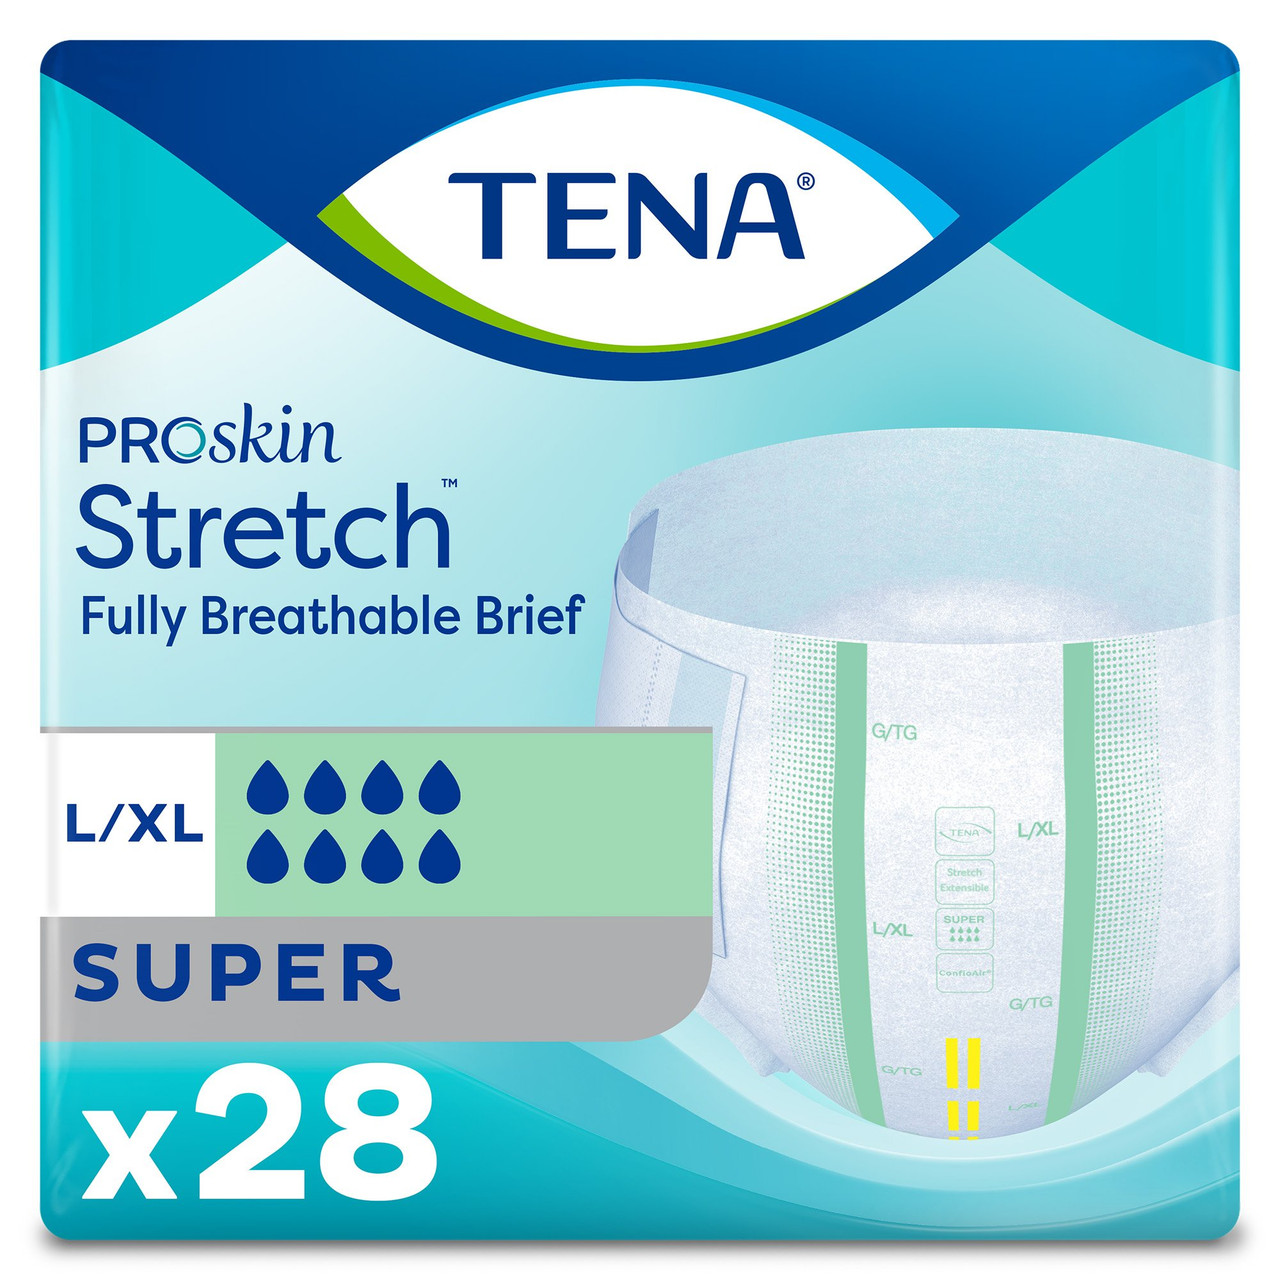 Tena Ultimate Incontinence Pull-Ons - Disposable Adult Diapers - XL